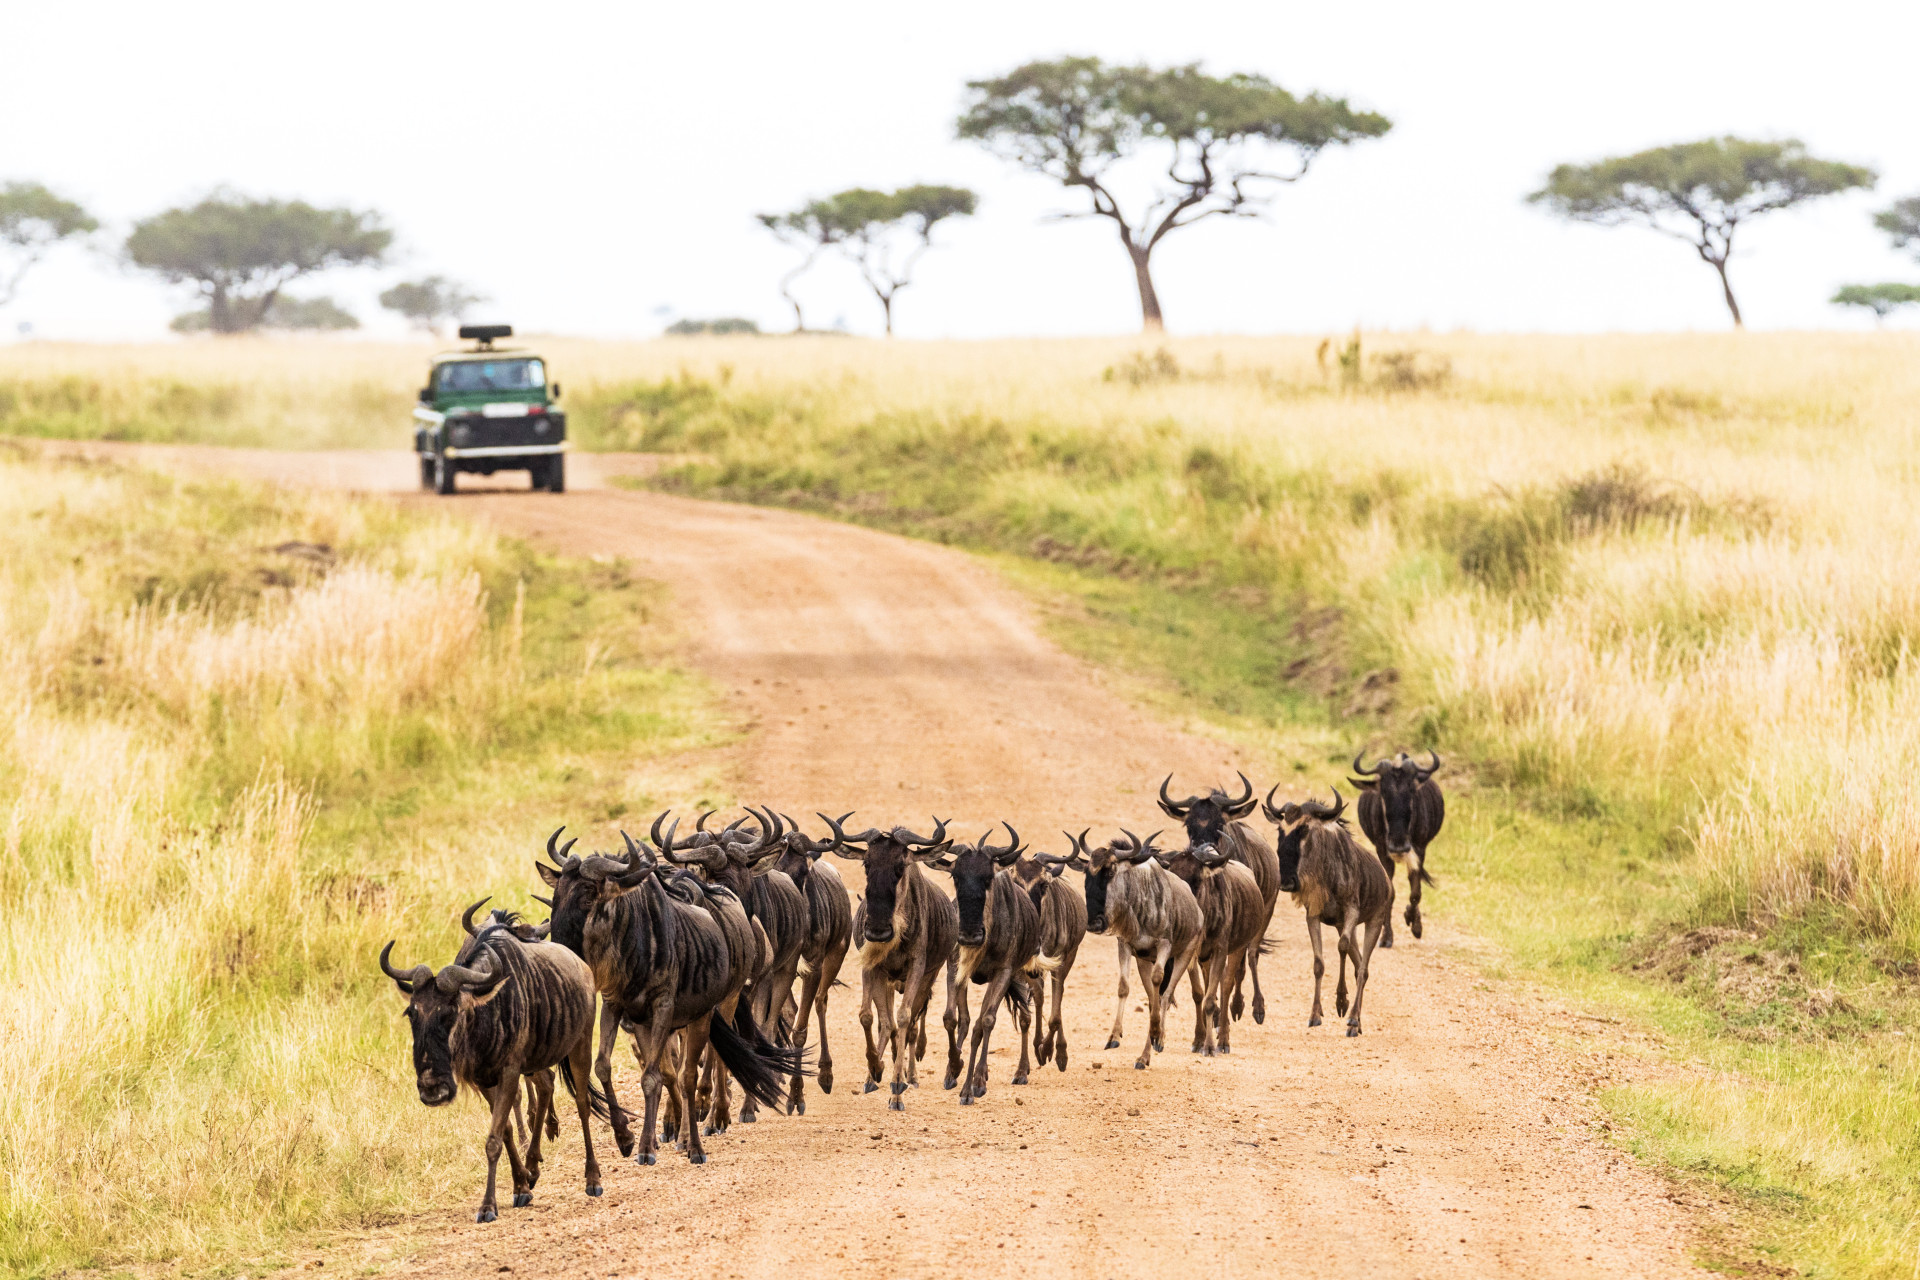 The Maasai Mara plains are mostly famous for their lions and leopards, but buffaloes, elephants, and rhinos can also be spotted here.<p>You may also like:<a href="https://www.starsinsider.com/n/477391?utm_source=msn.com&utm_medium=display&utm_campaign=referral_description&utm_content=212512en-us"> The forgotten art of the blacksmith</a></p>